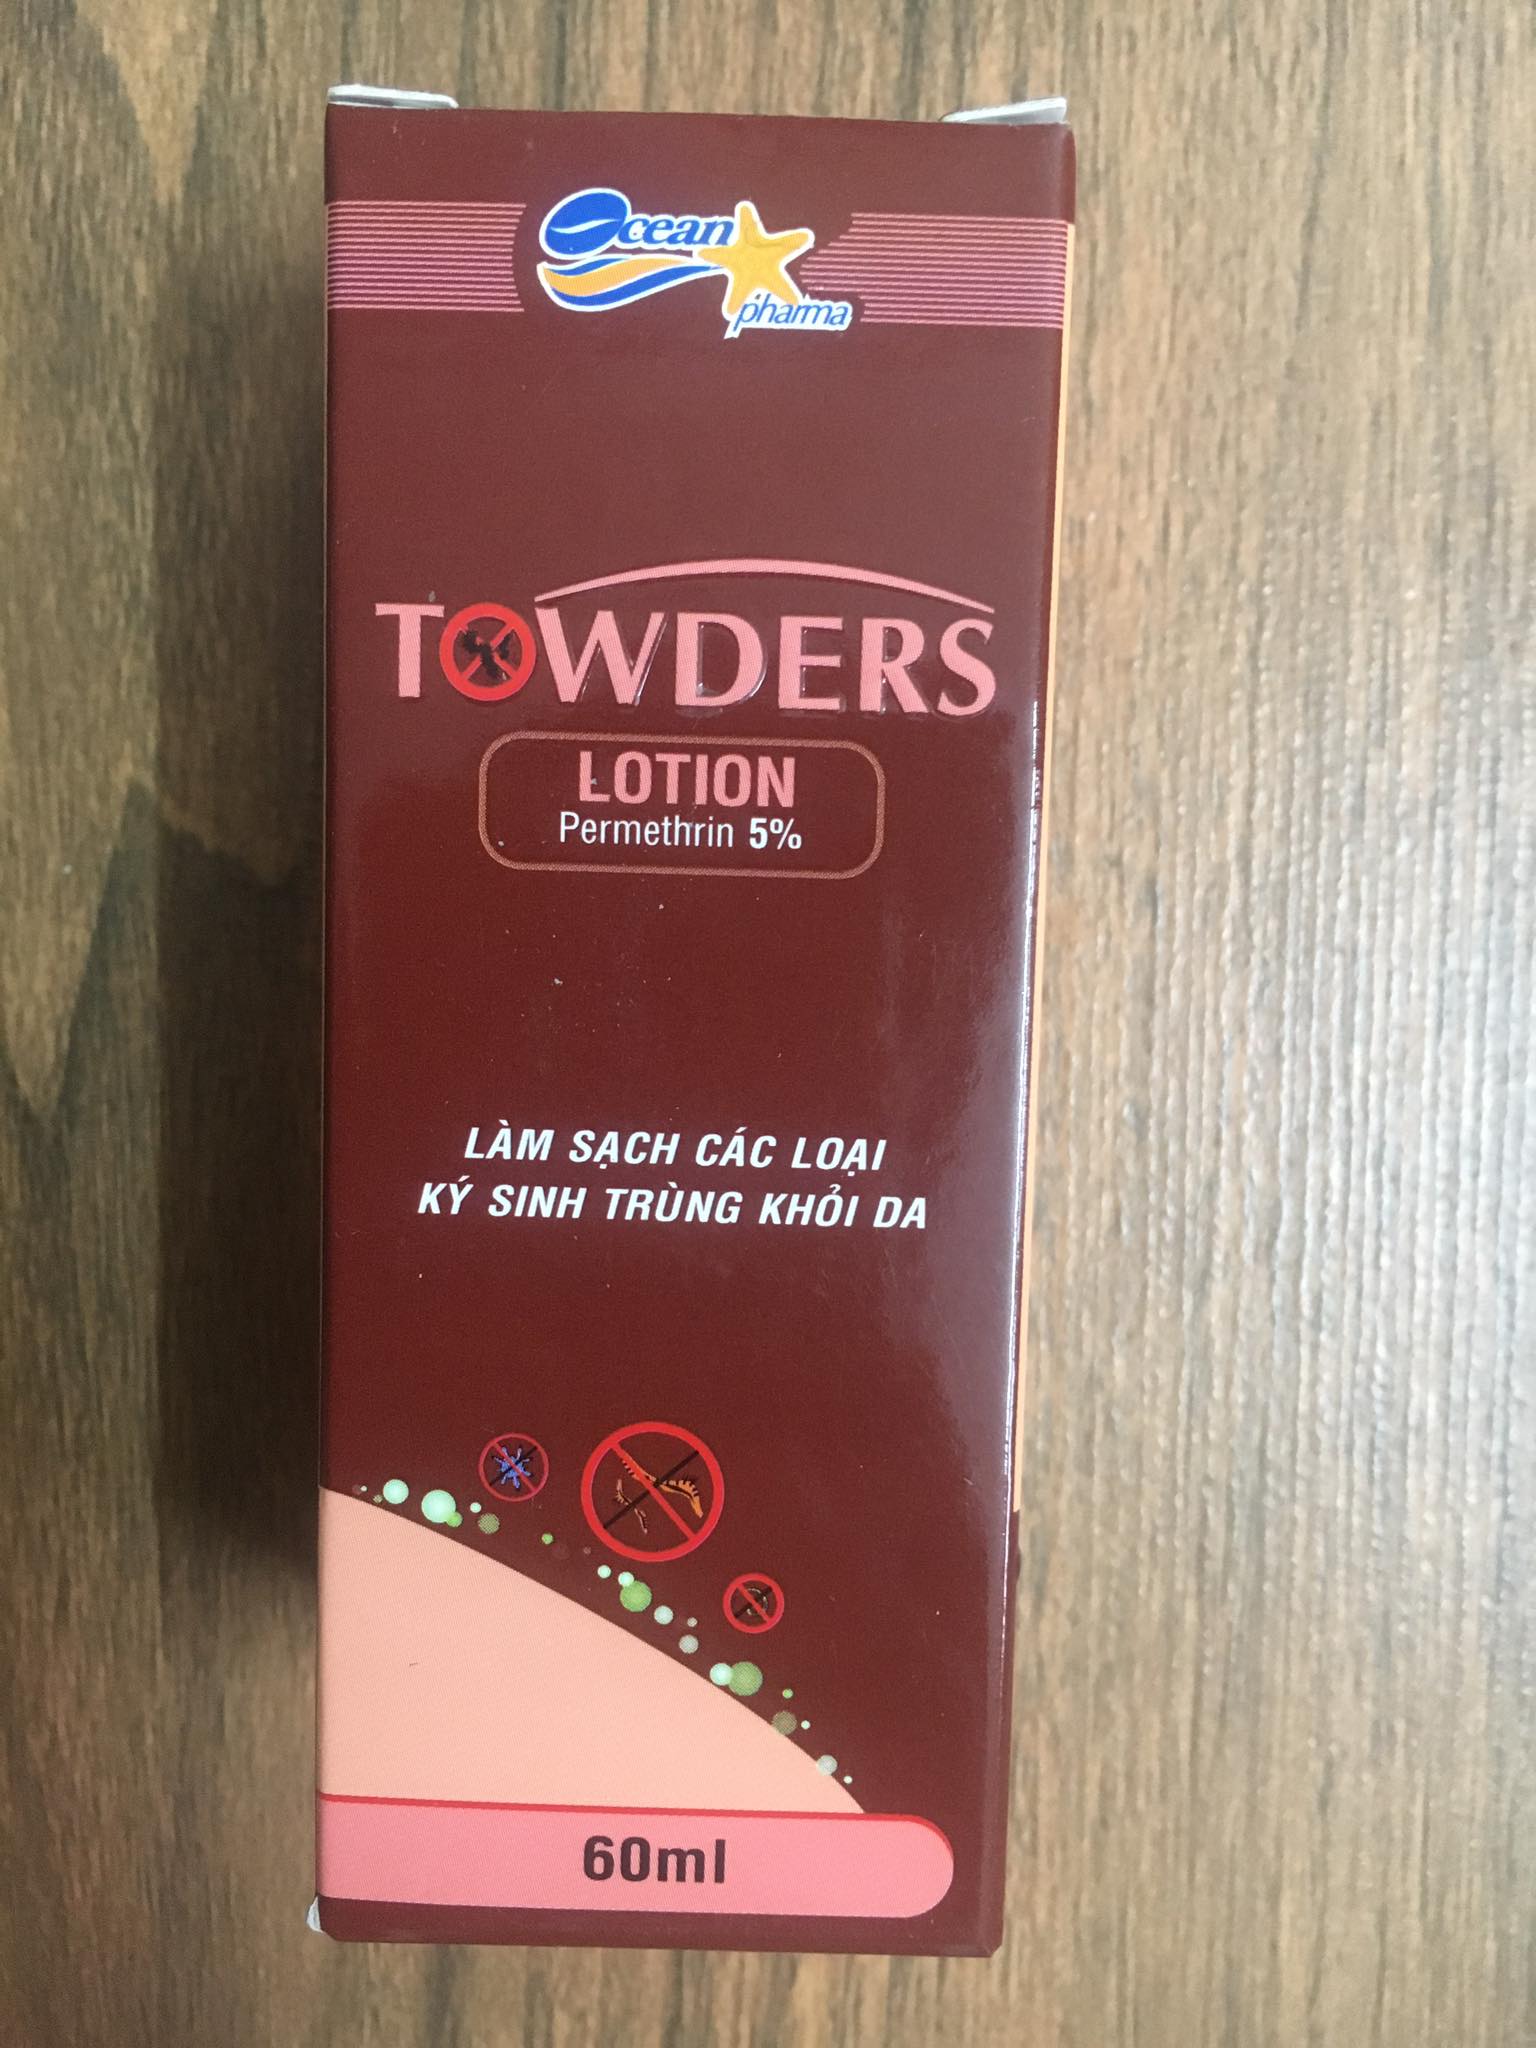 Towders lotion